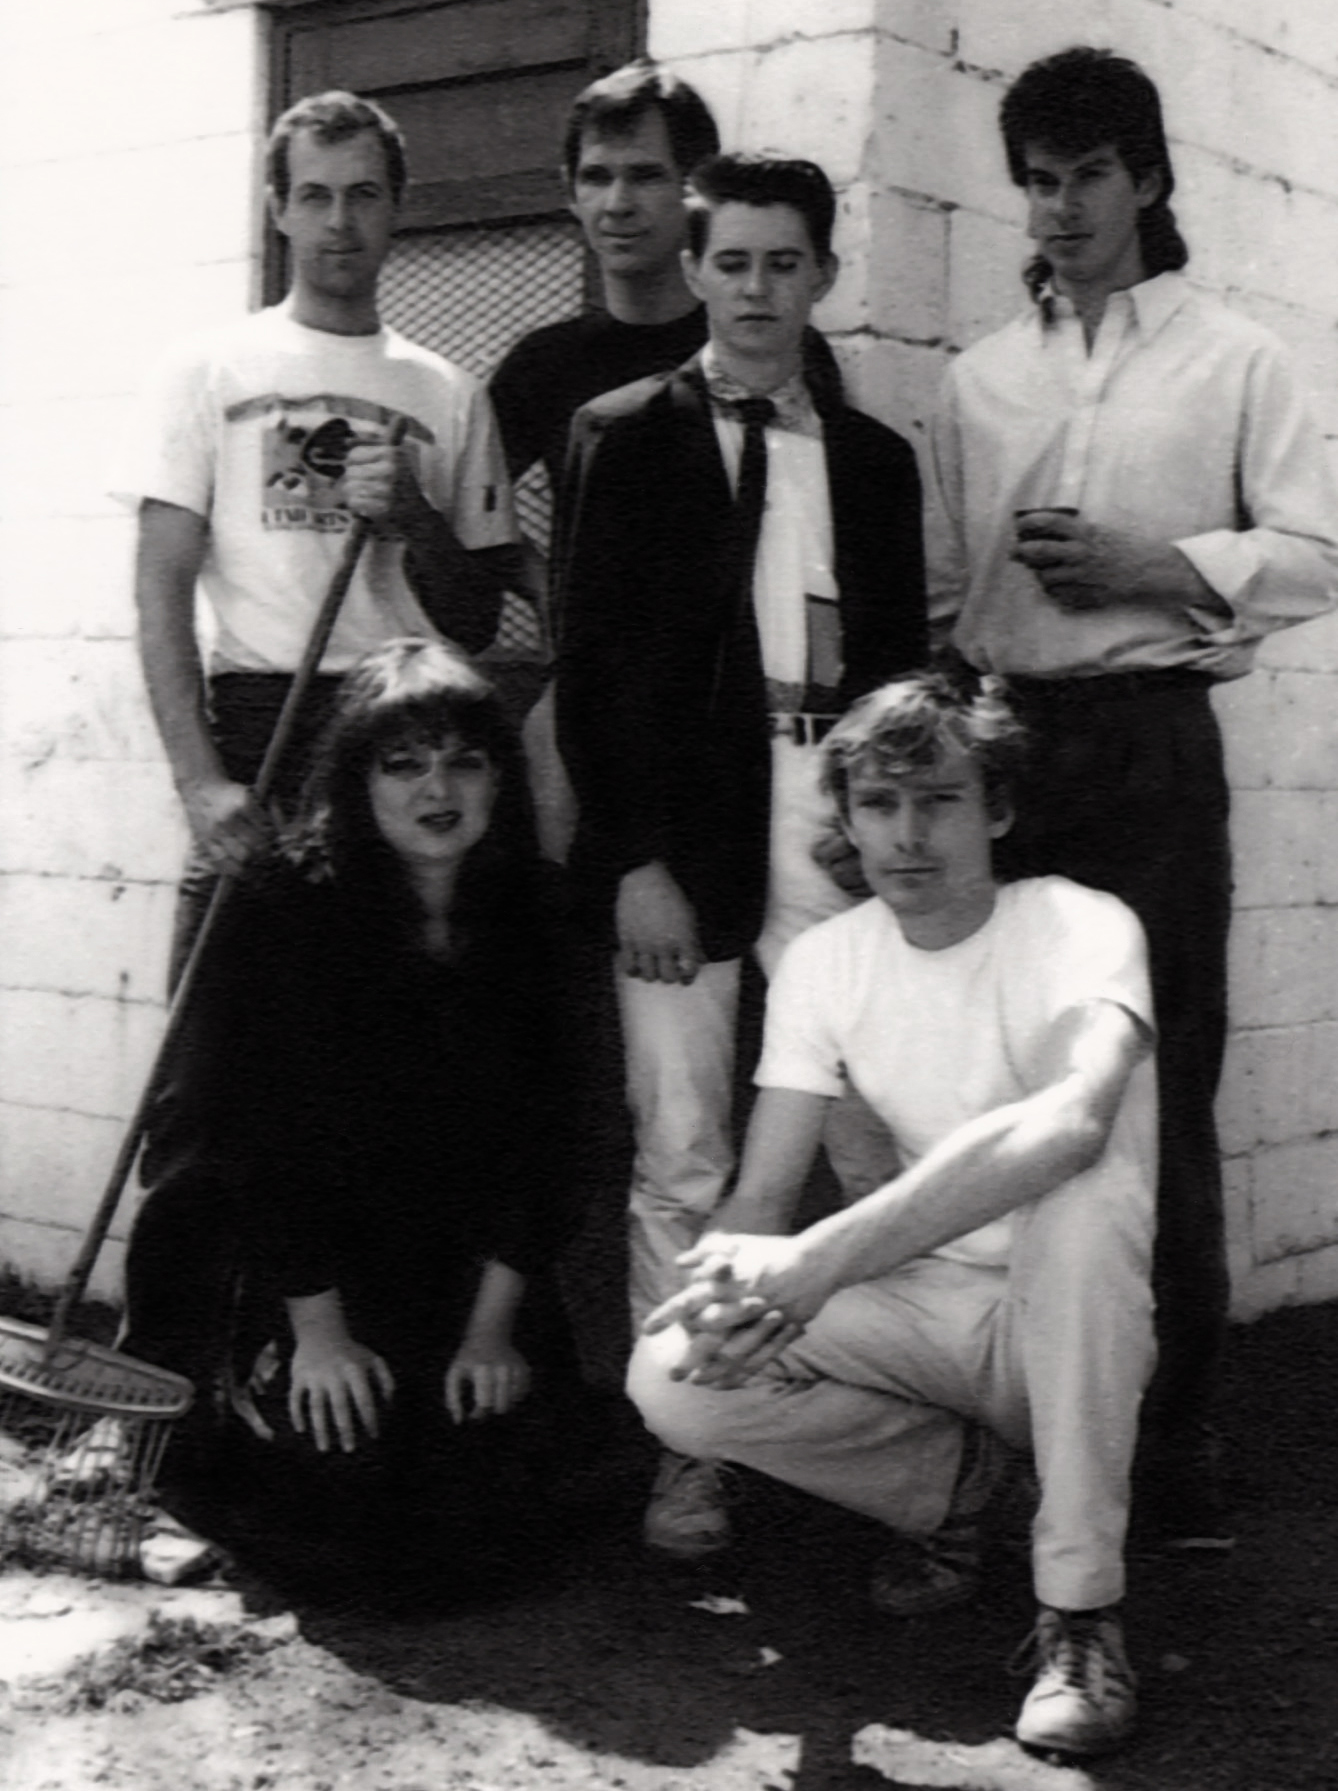 The members of the band Thinking Plague in 1987.